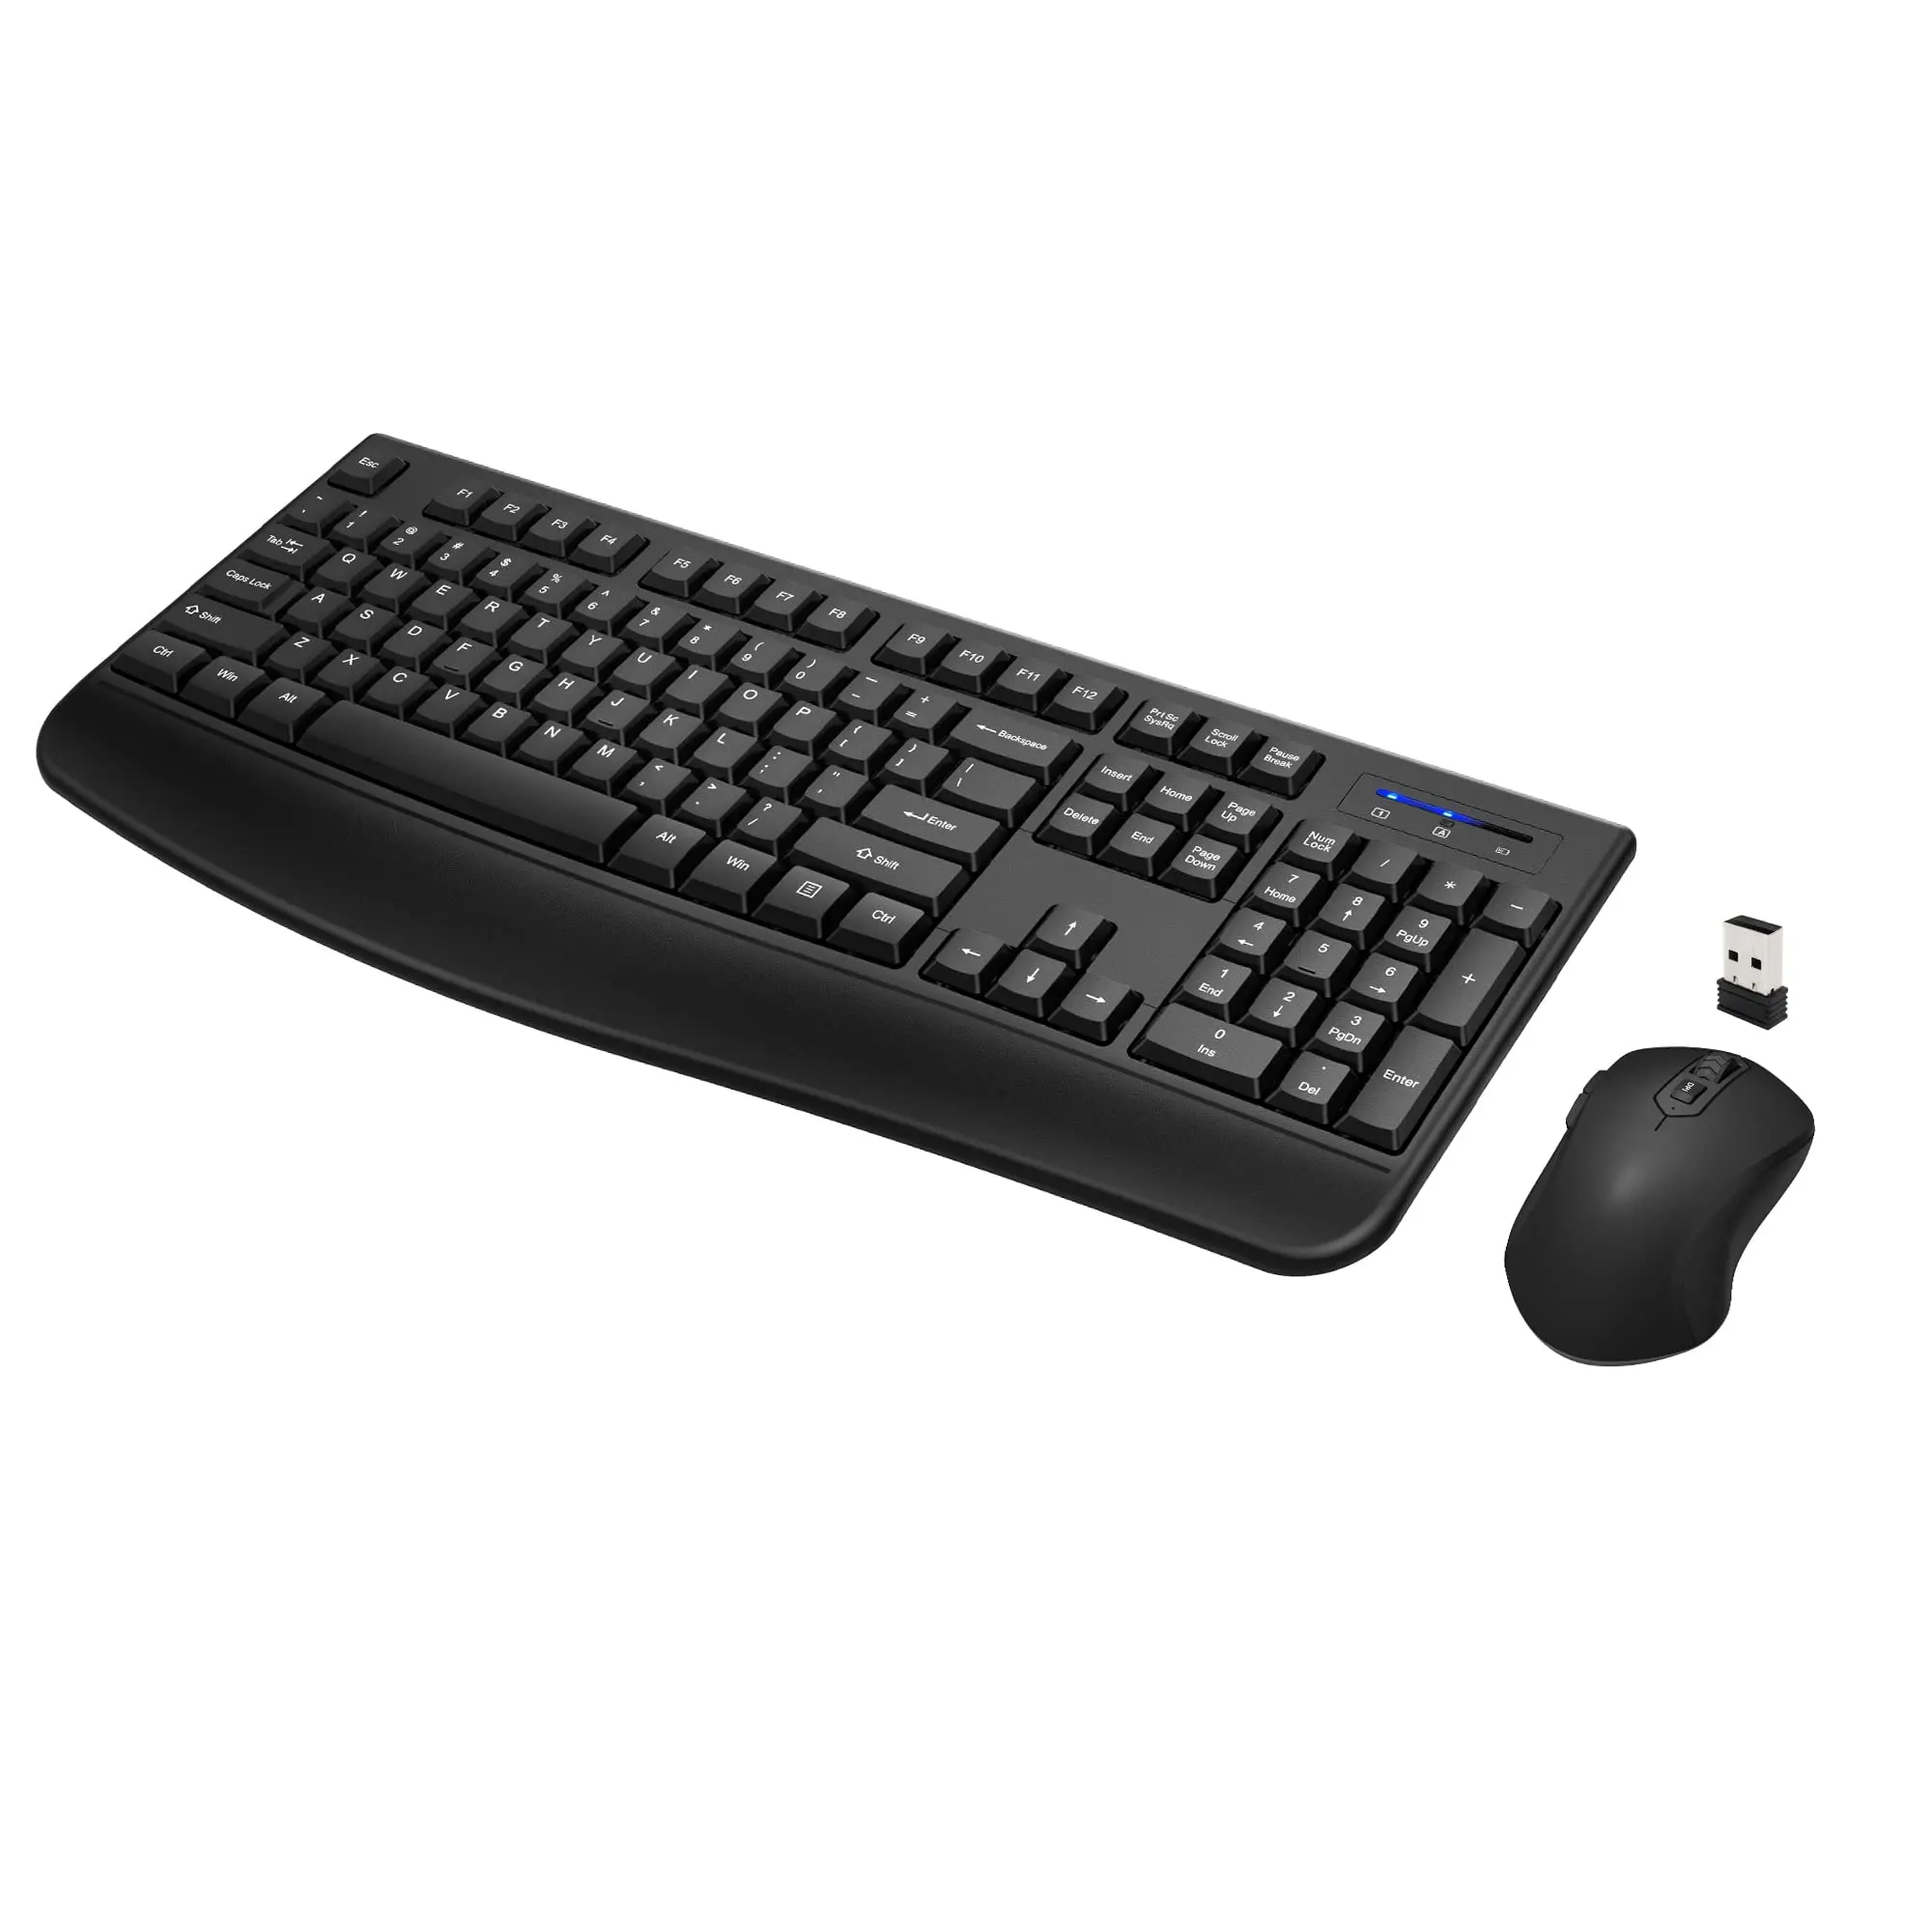 

Wireless Keyboard and Mouse Combo Full-Sized 2.4GHz Wireless Keyboard with Comfortable Palm Rest and Optical Wireless Mouse, Black